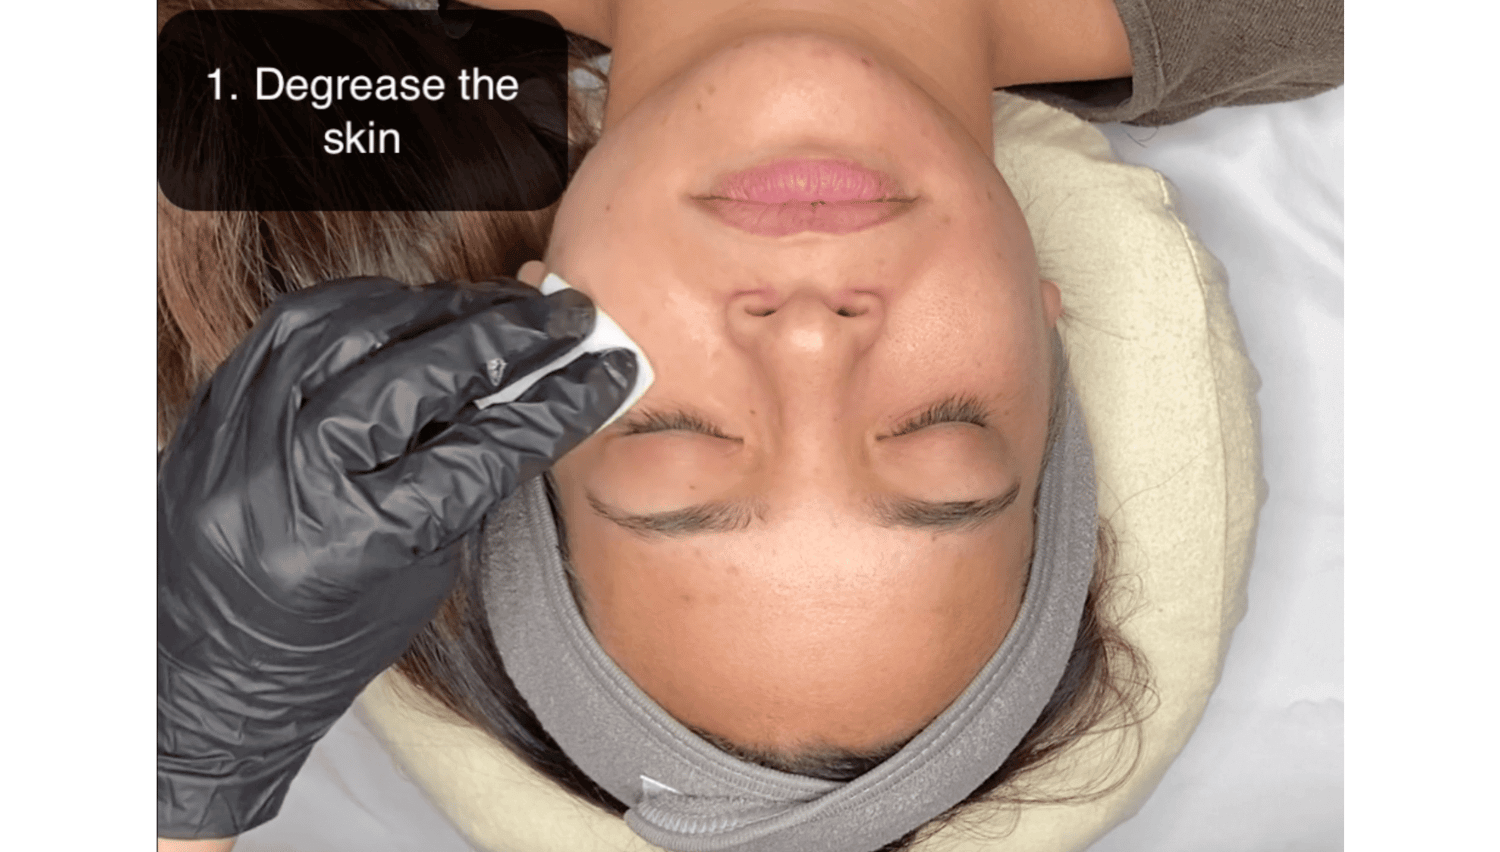 Online Chemical Peel video step-by-step demonstration degreasing the skin